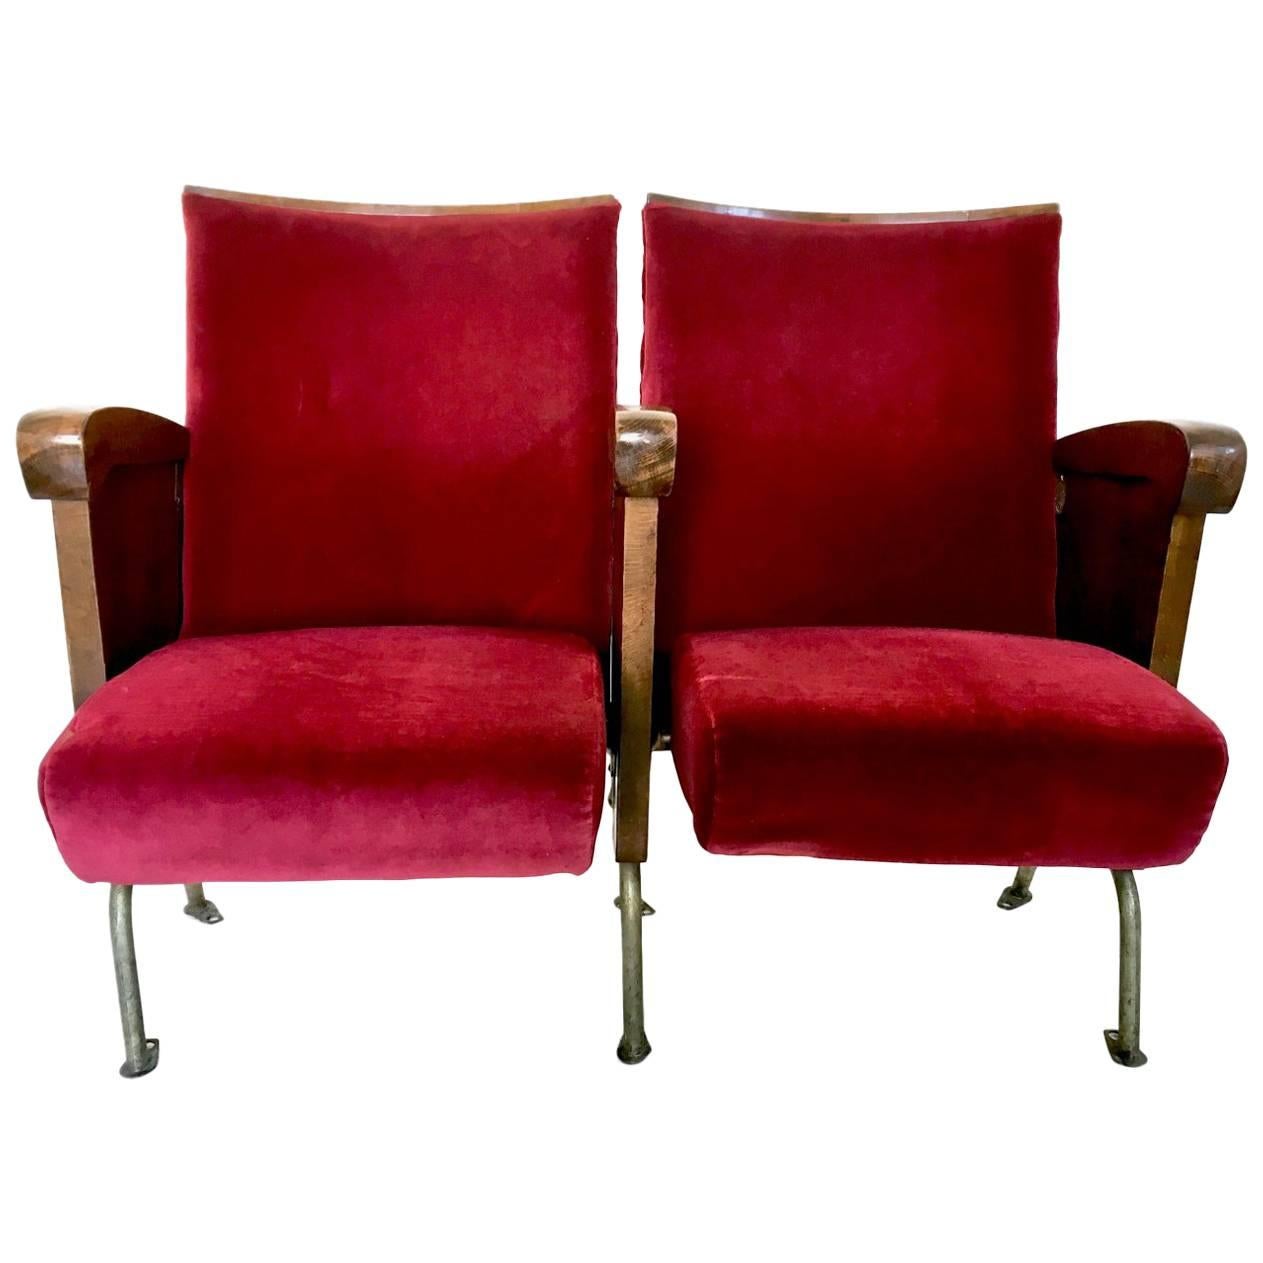 Pair of Red Velvet Cinema Seats by Ascol with Wooden Structure, Italy, 1950s